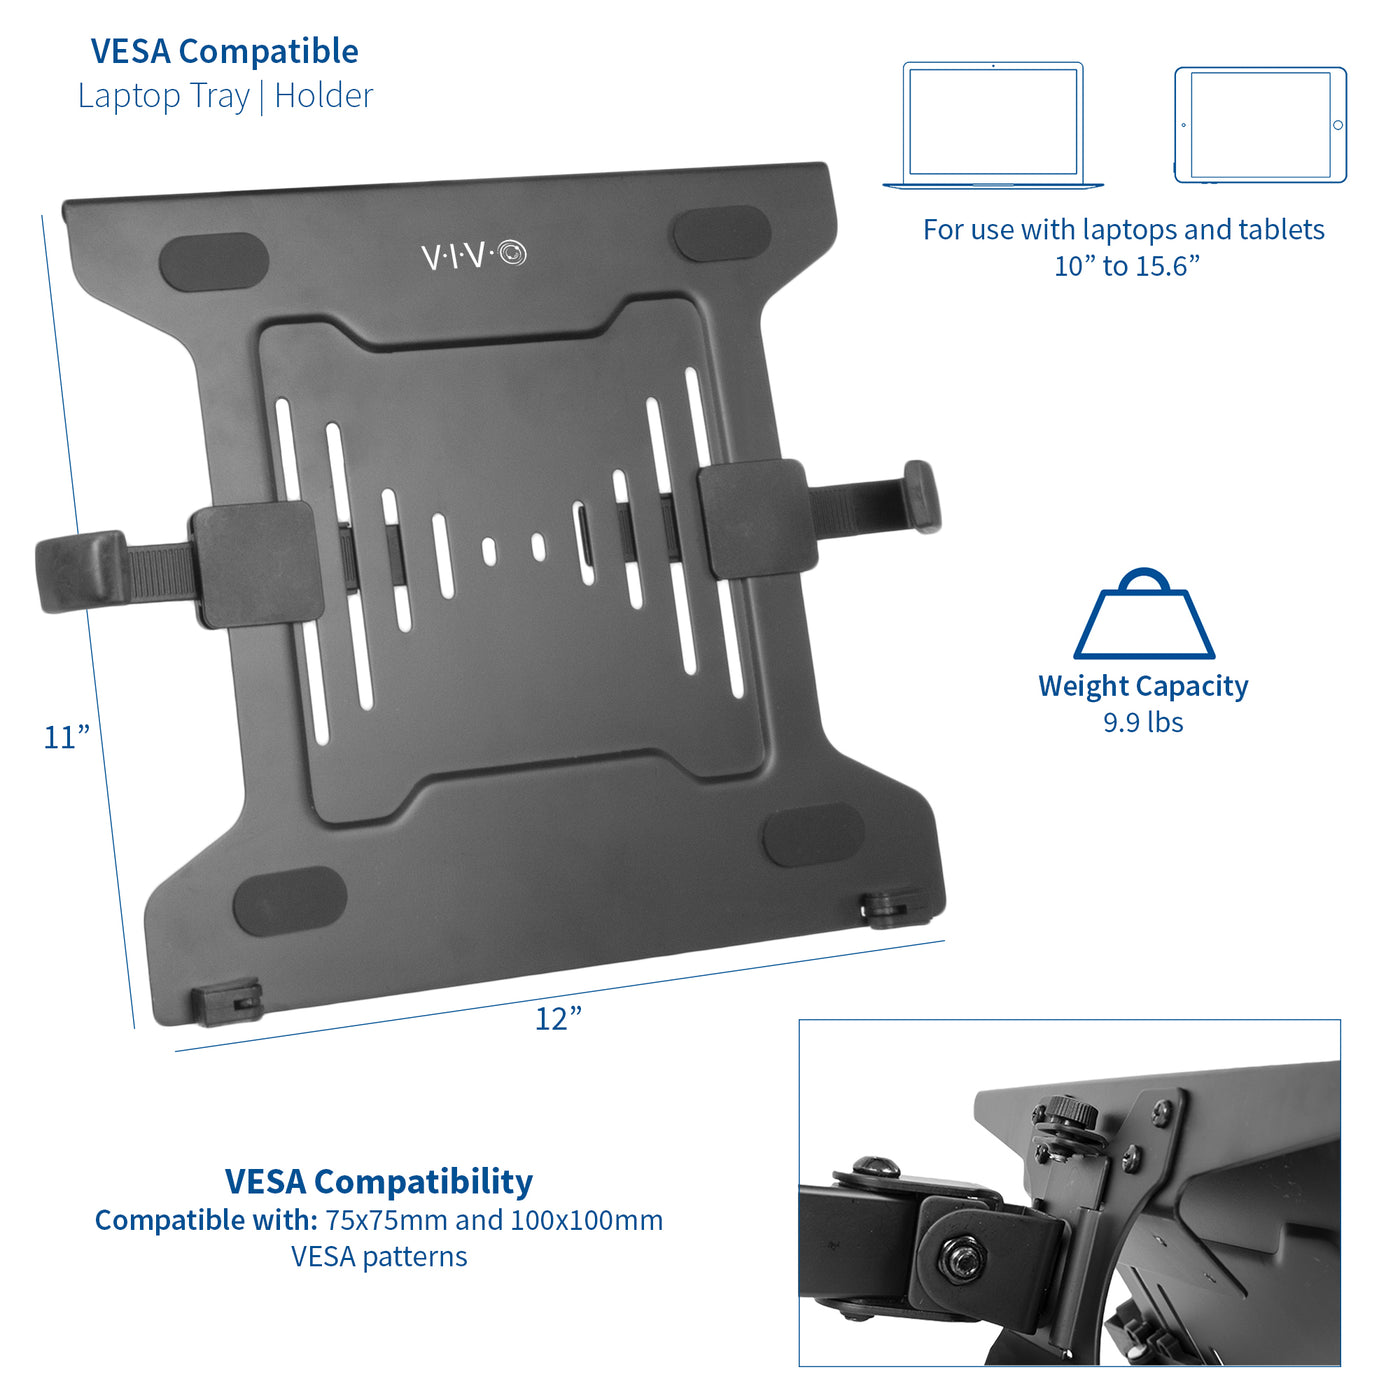 Laptop stand with standard VESA compatibility.